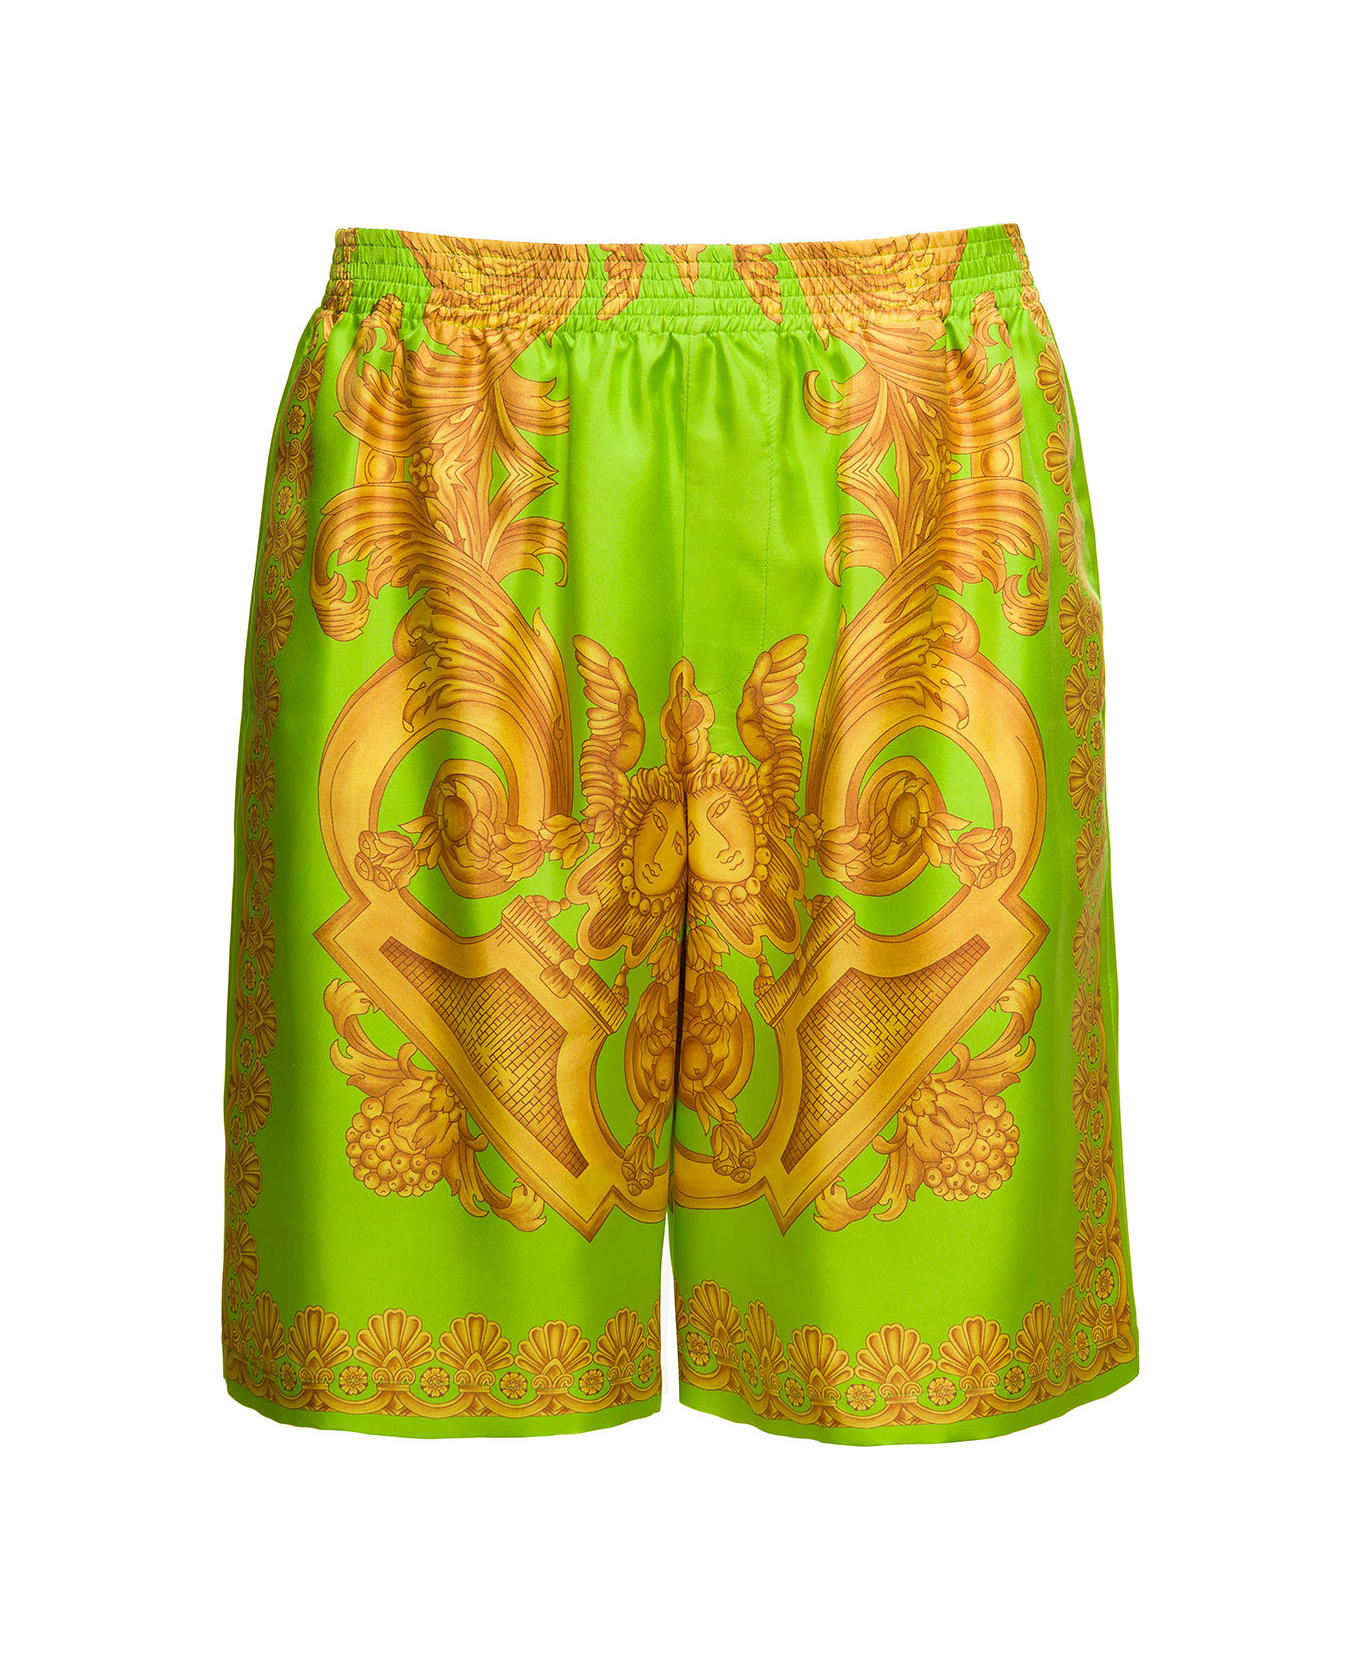 Versace Green And Gold Shorts With All-over Barrocco Print In Silk Man - Green